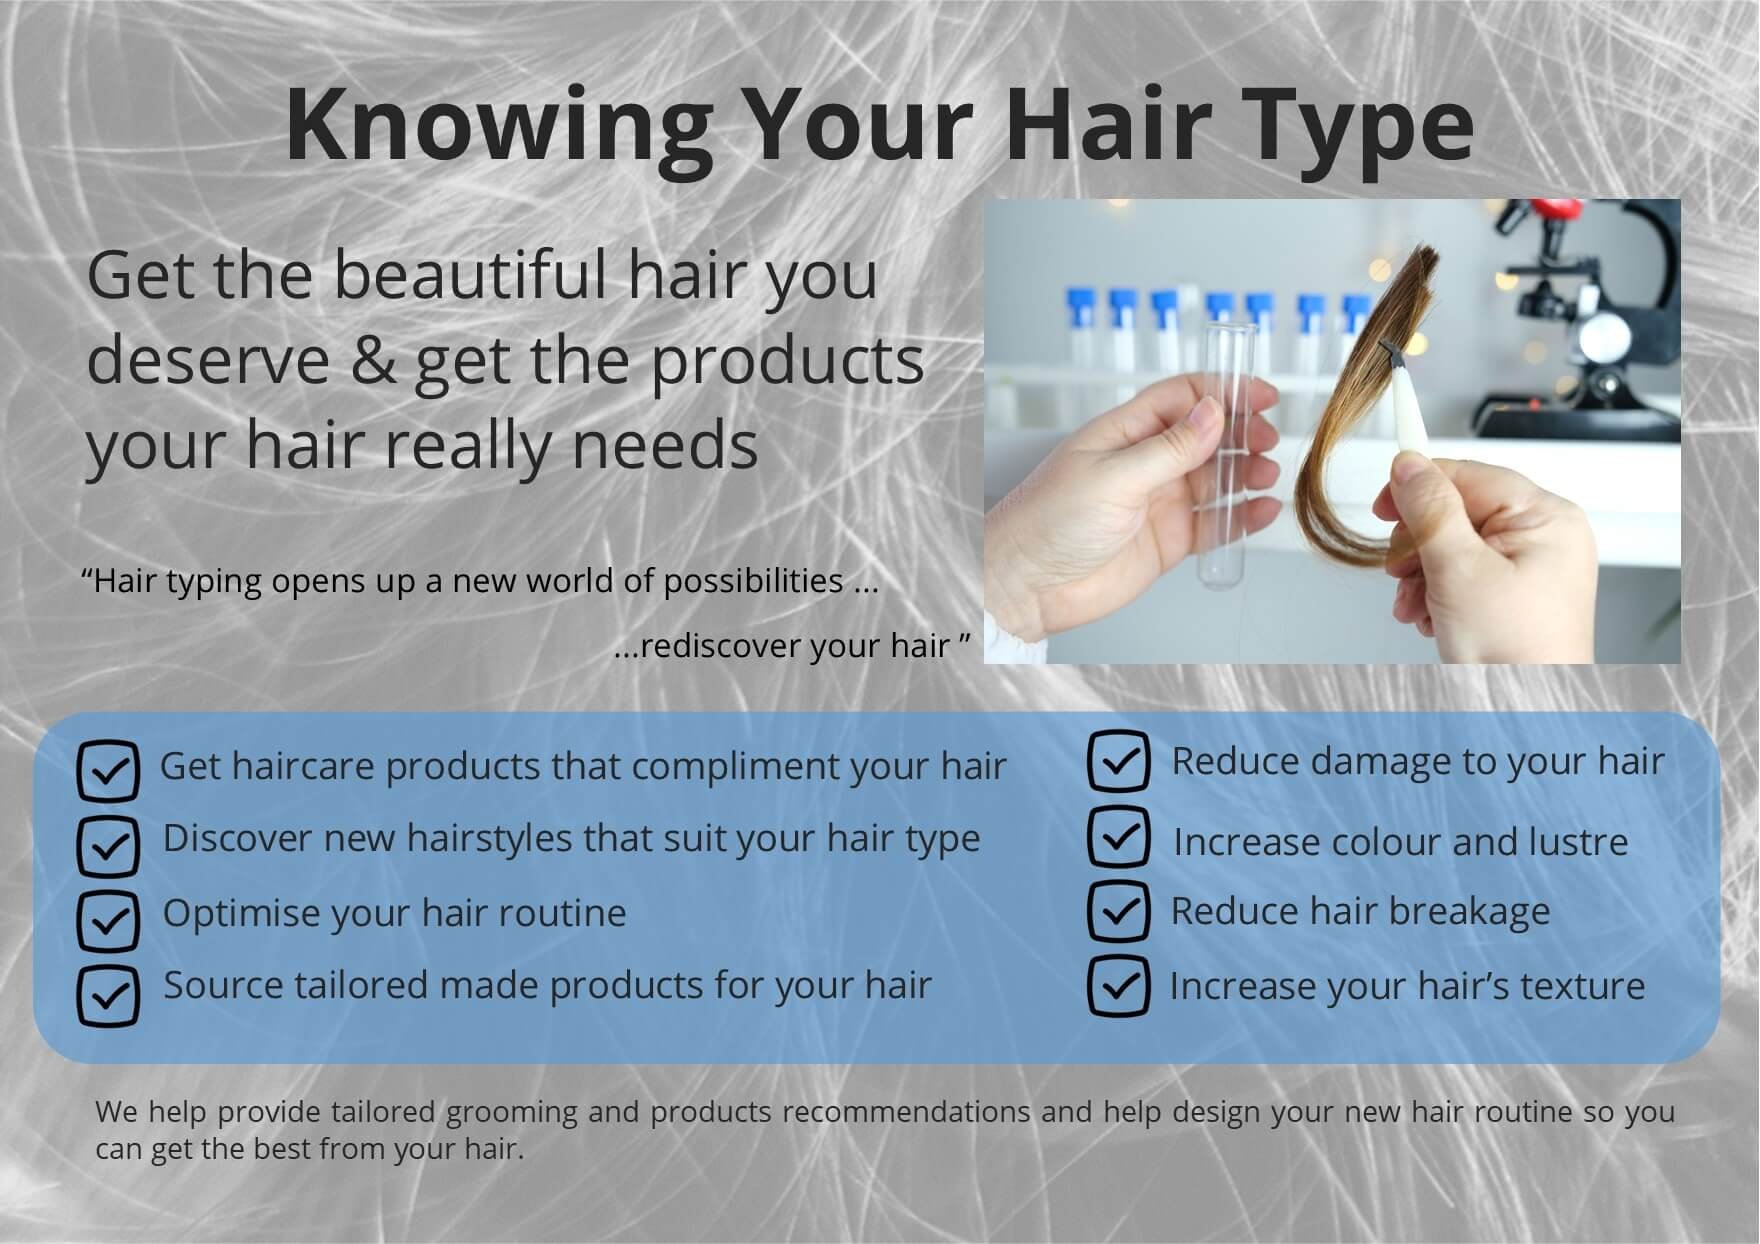 Hair Type Test Analysis From The HairKnowHow Experts - Accurate And Expert  Advice —  Get Accurate Results with Our Professional Hair  Test & Analysis Services - Unlock Your Hair's True Potential